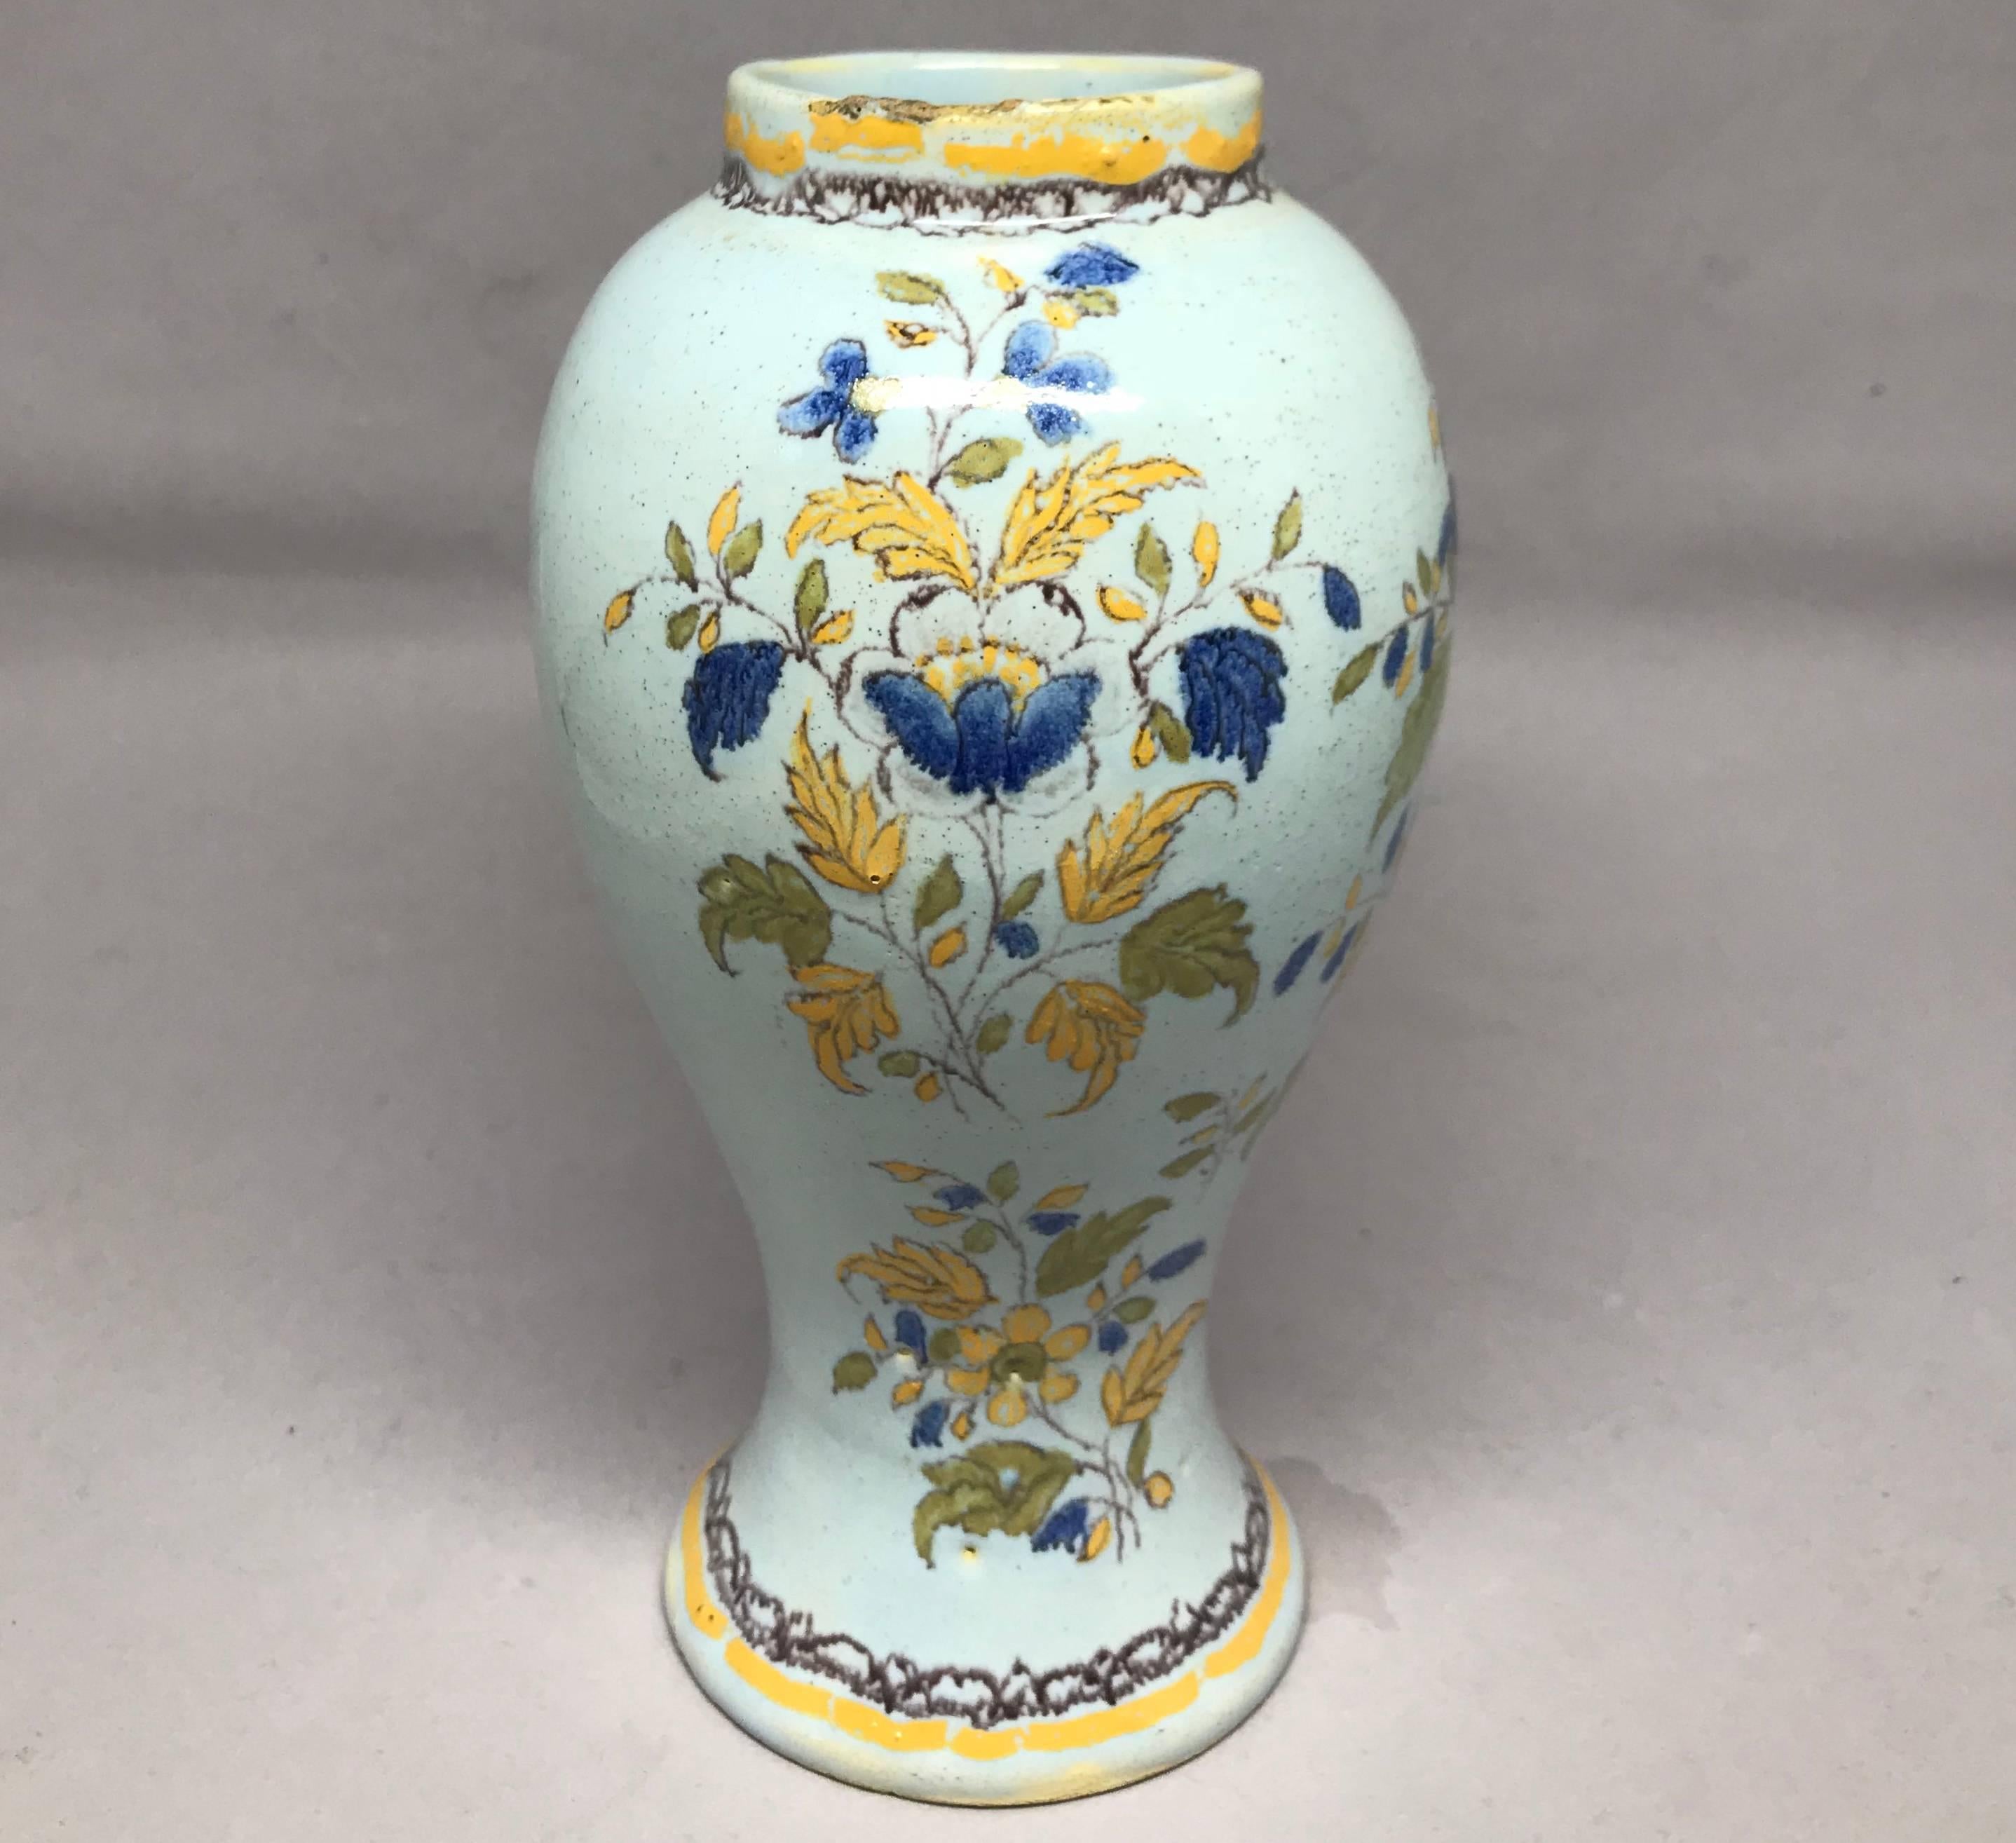 French blue and yellow faience vase. Moustiers vase in pale blue tin glaze with blue and yellow flowers, France, 19th century.
Dimensions: 3